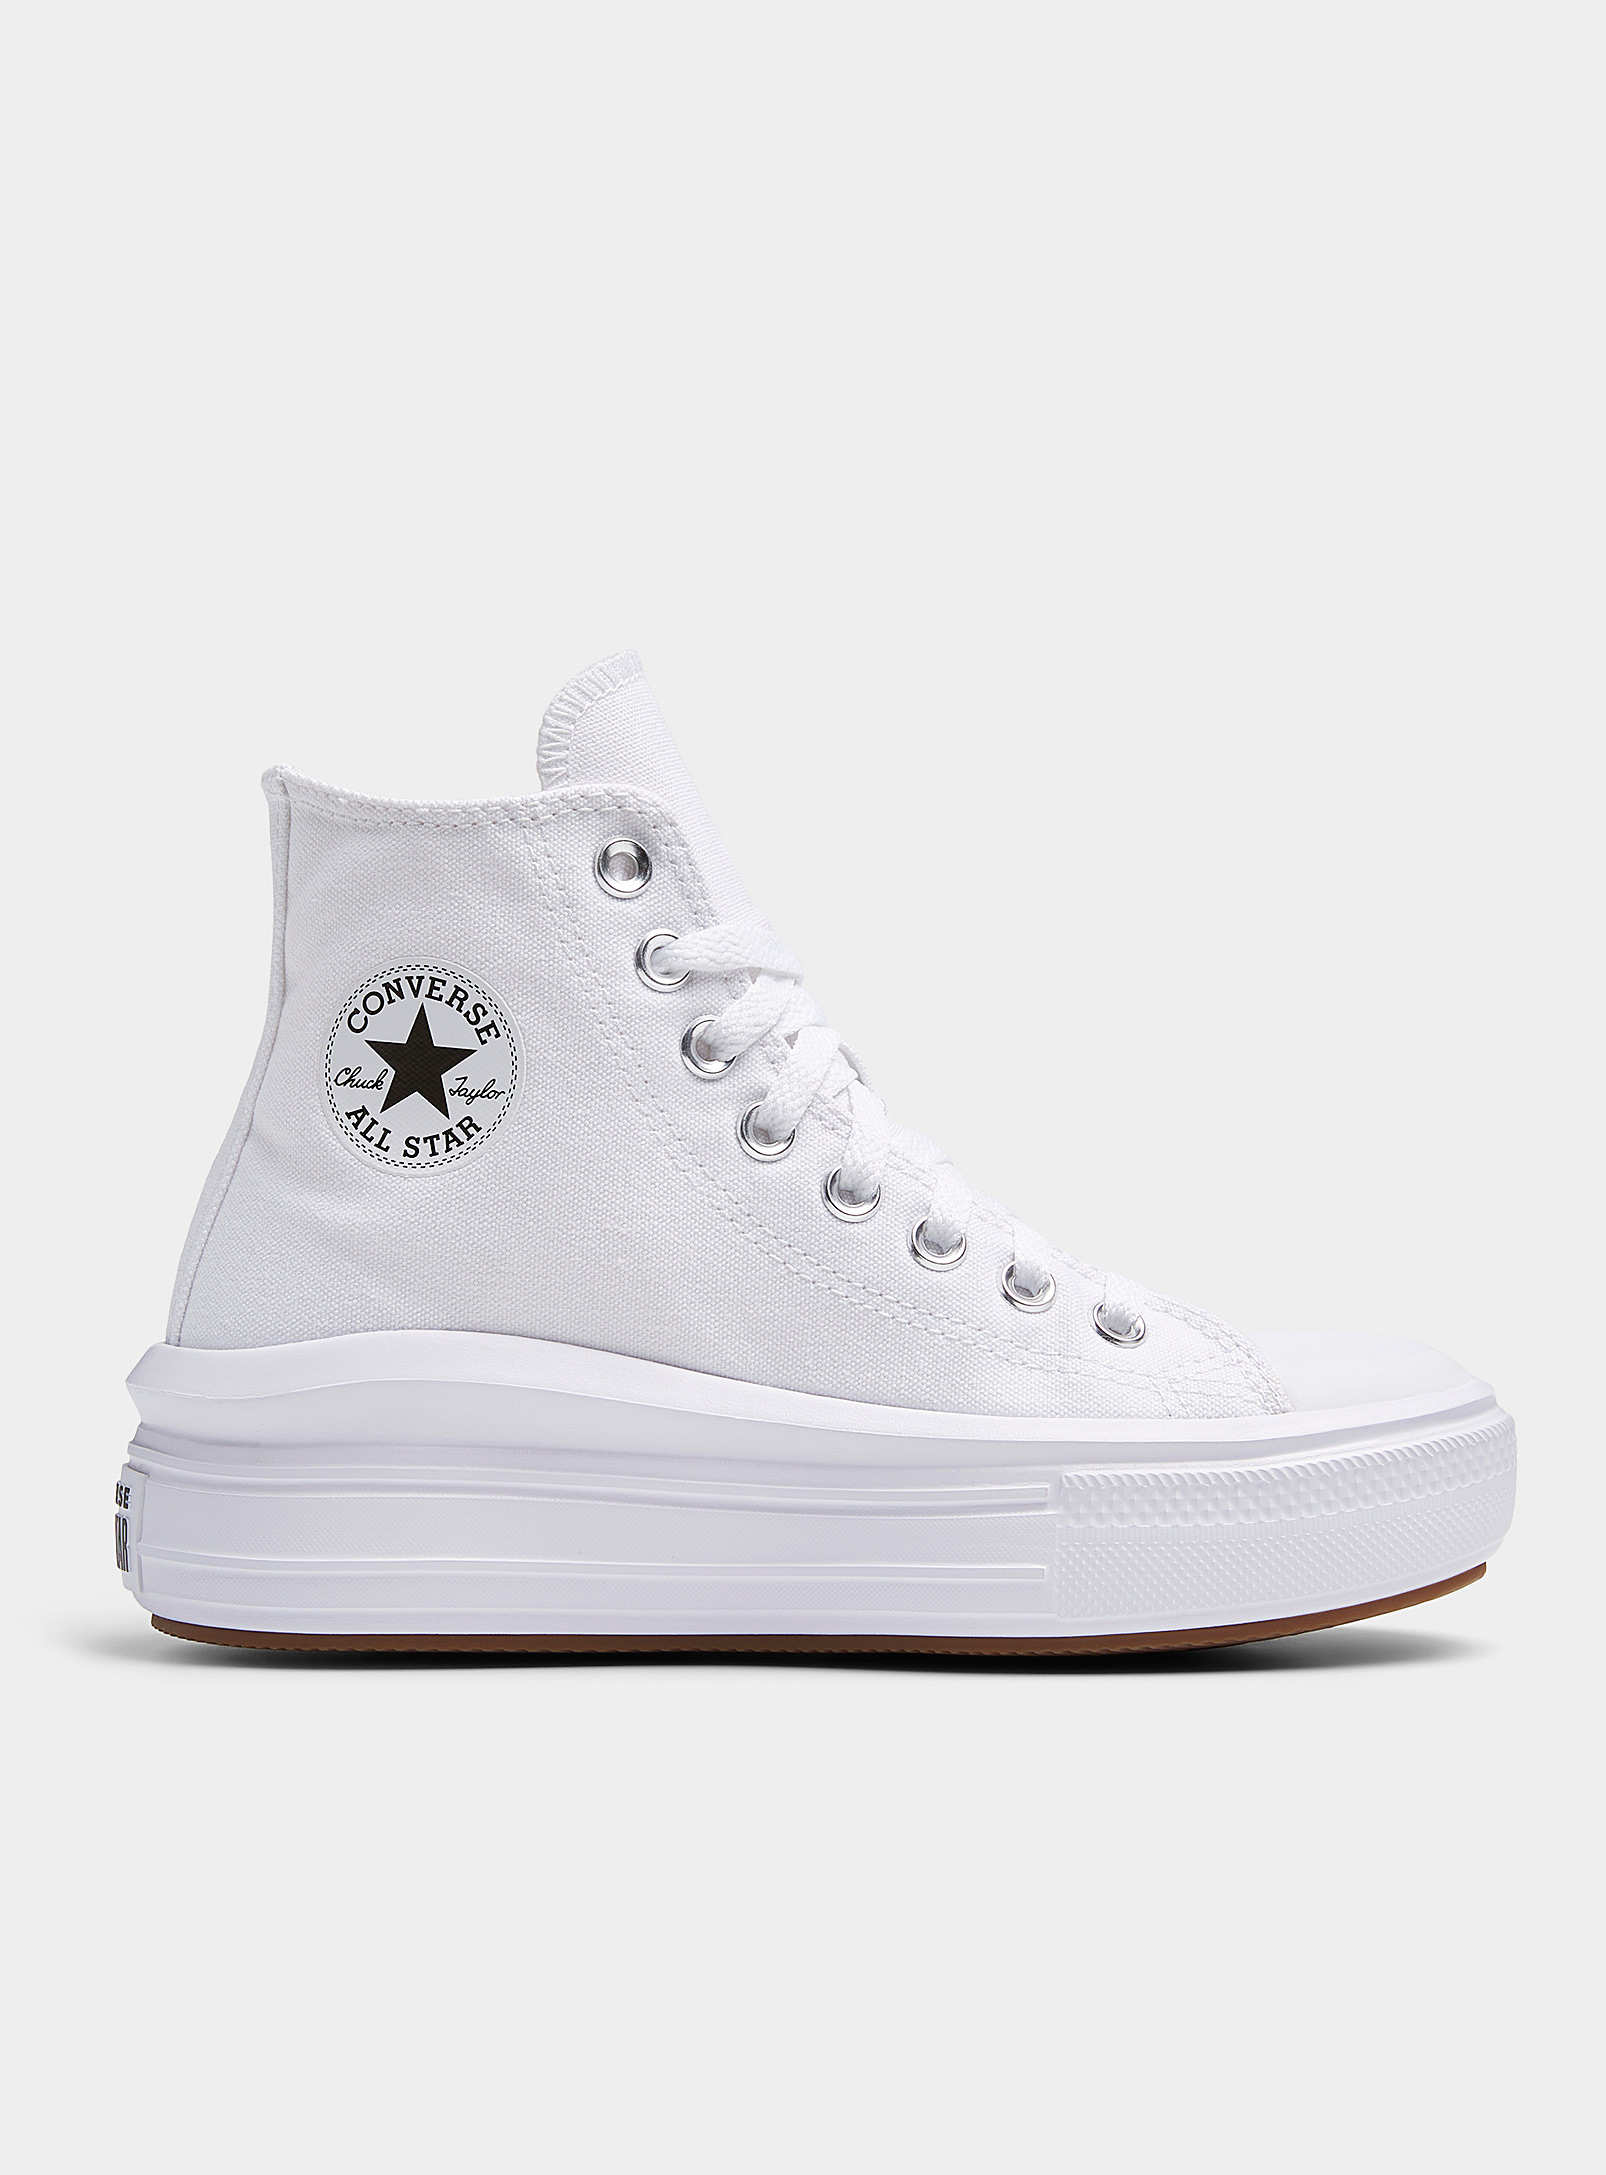 Converse Chuck Taylor All Star Move High Top Platform Sneakers Women In White